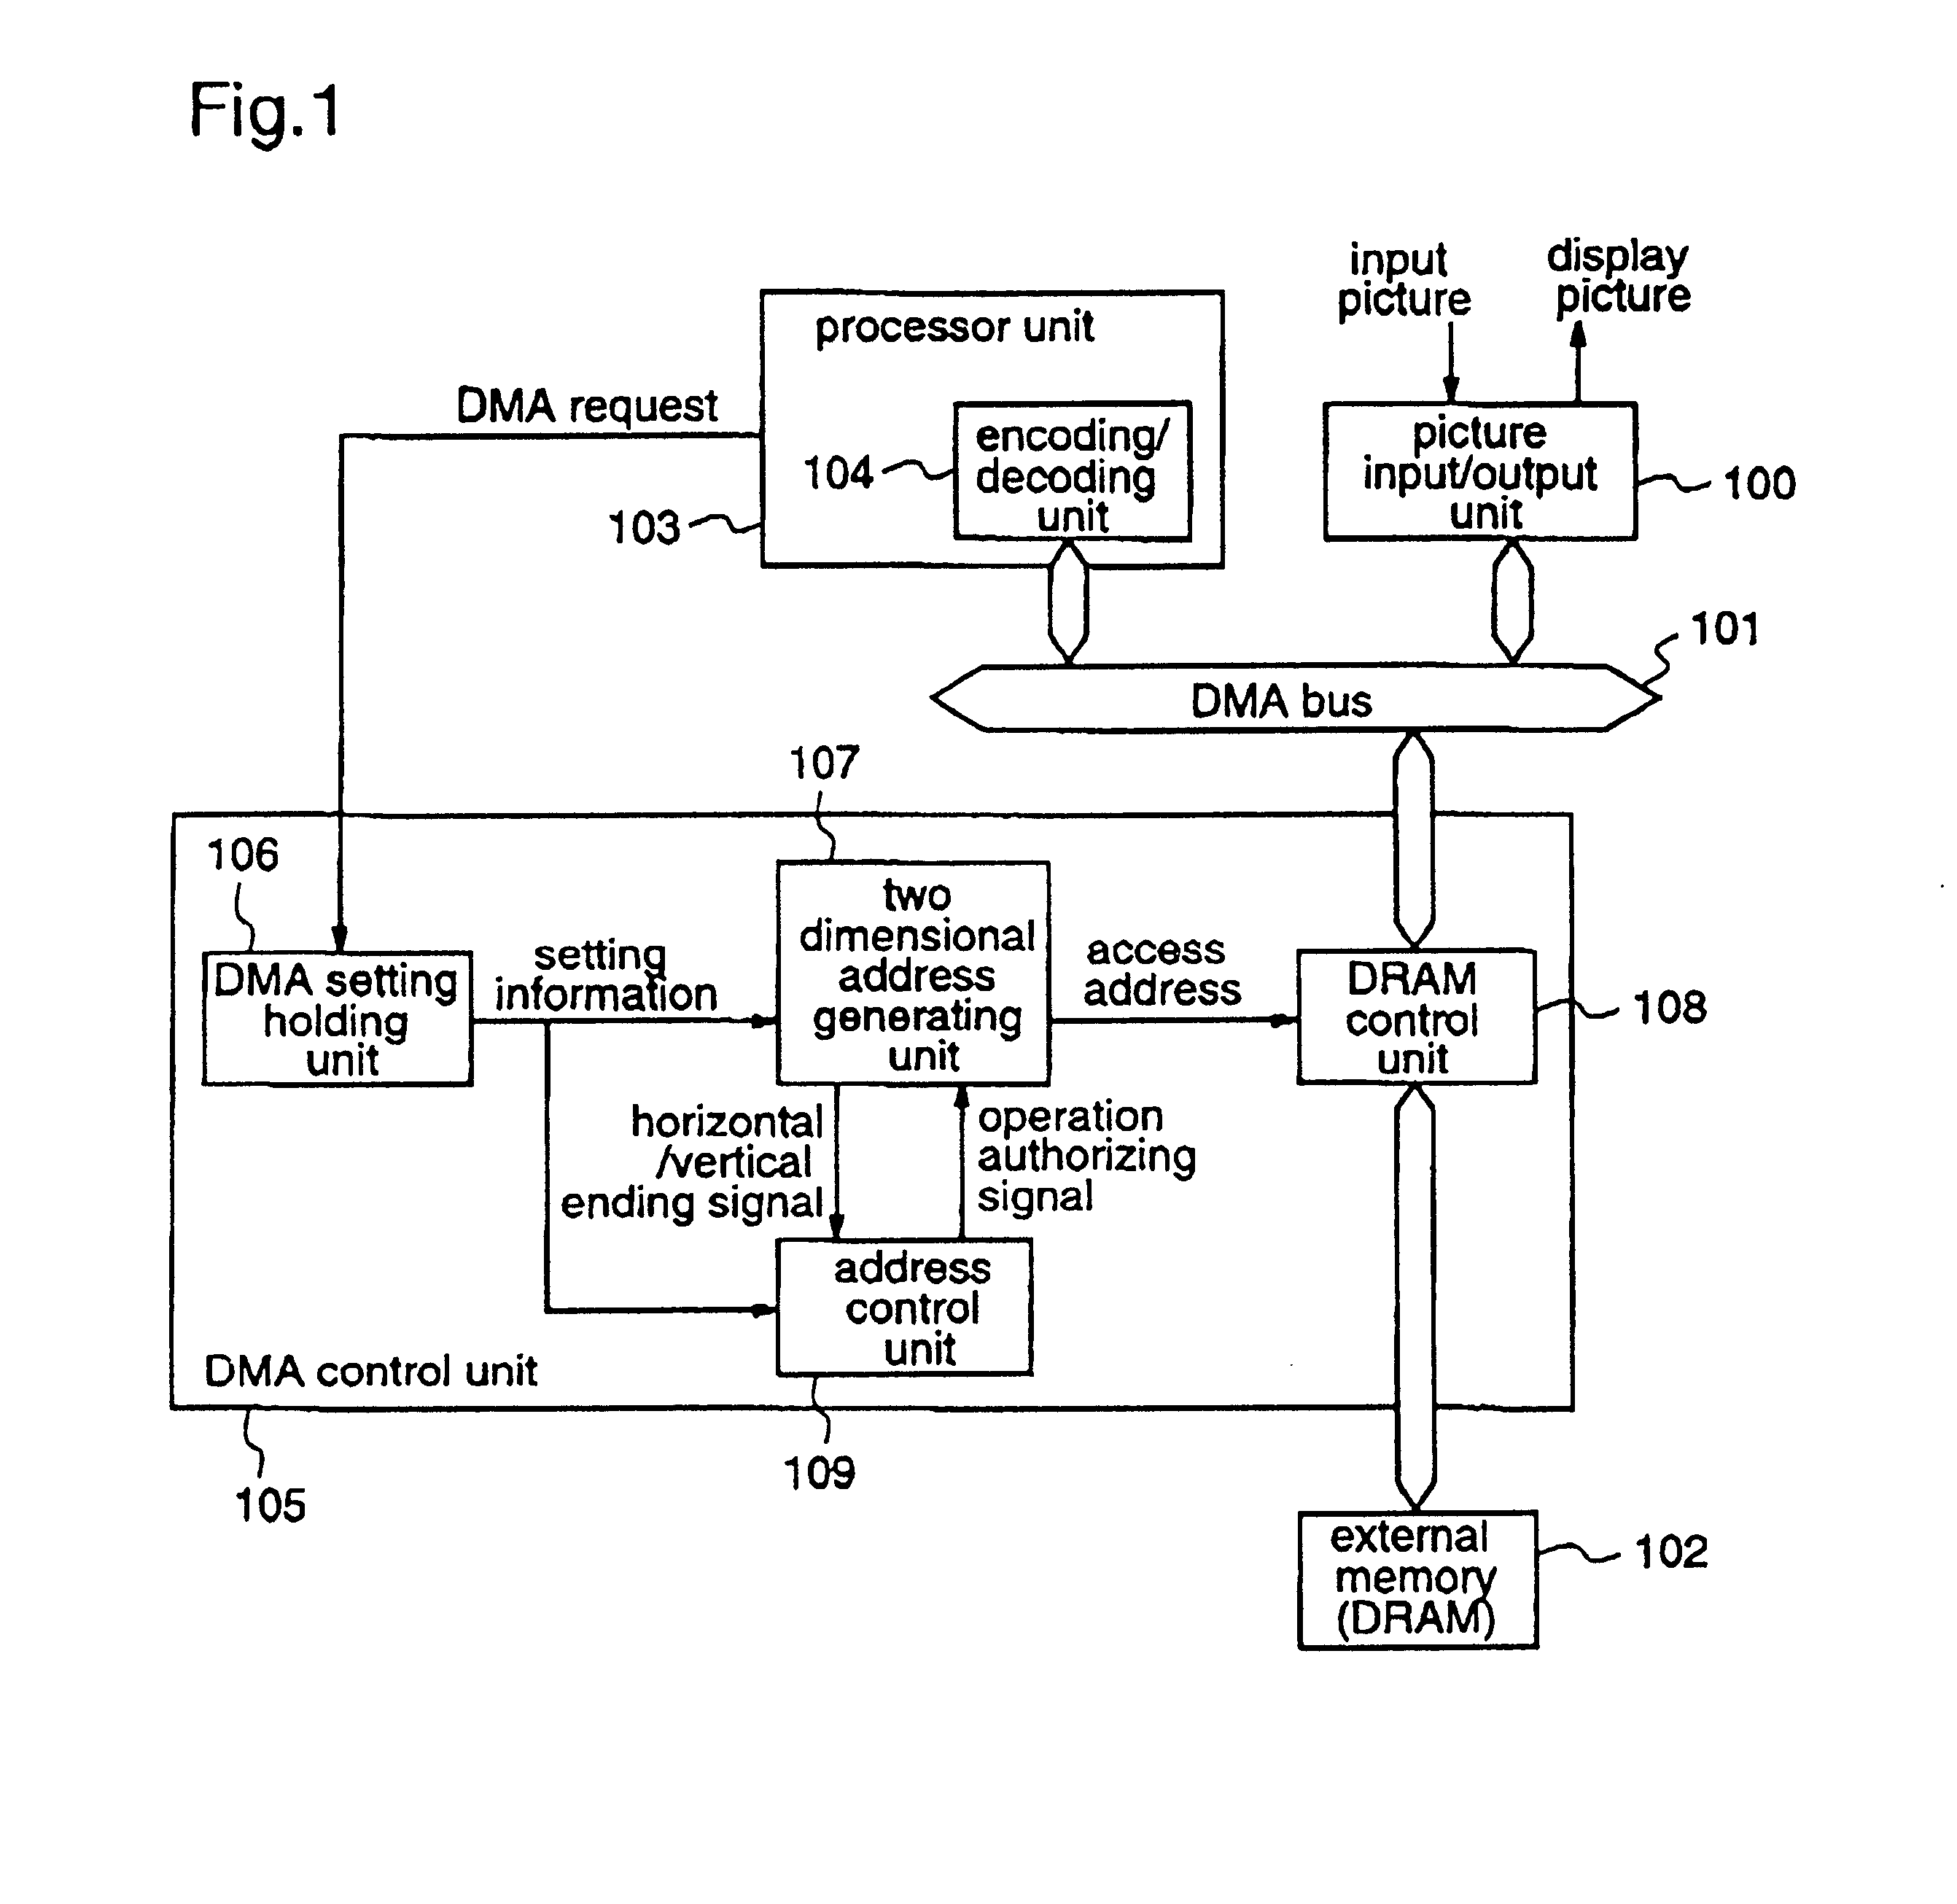 Video processing apparatus for performing address generation and control, and method therefor